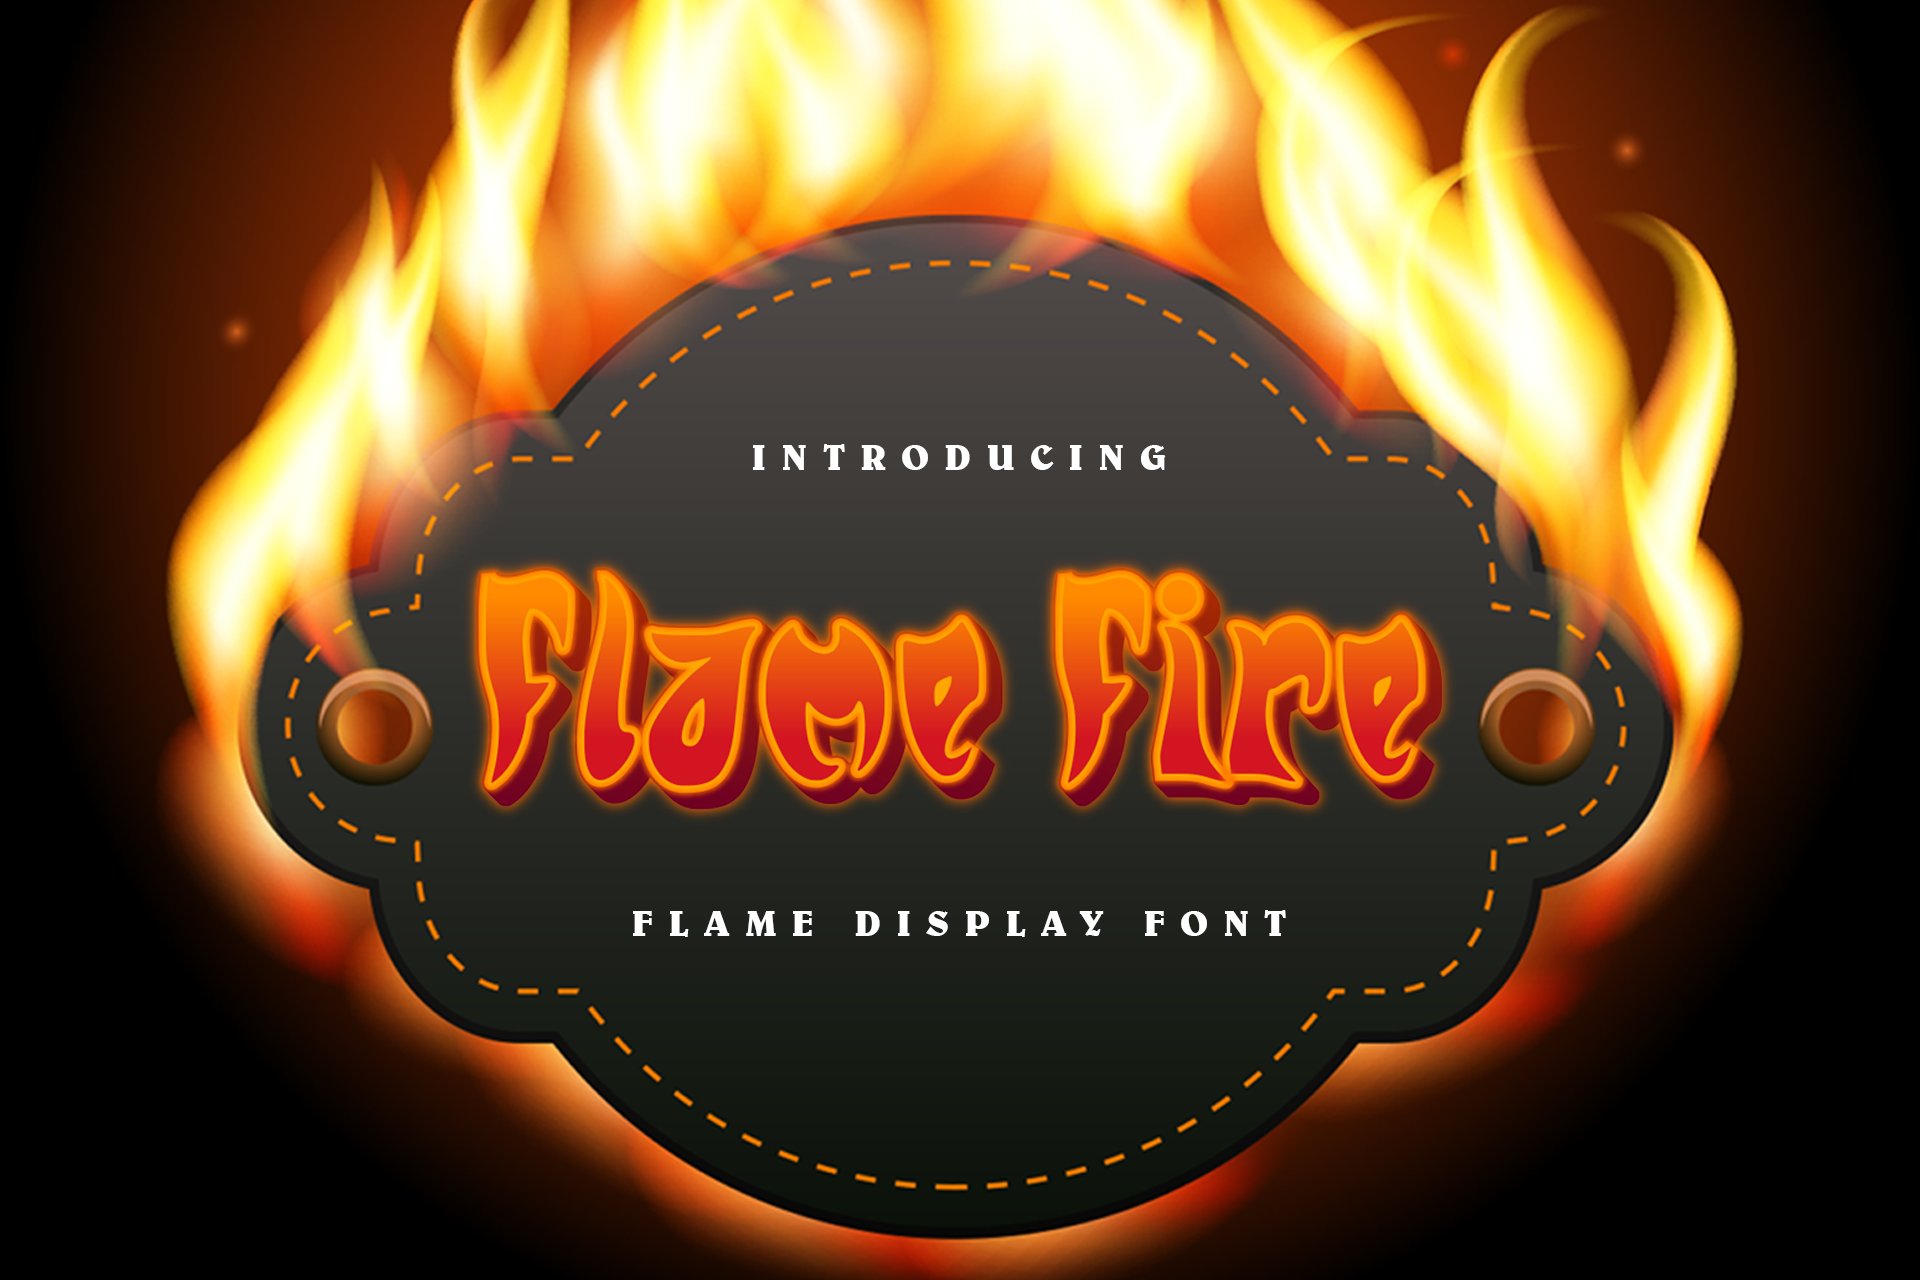 Flame Fire Display Font cover image.